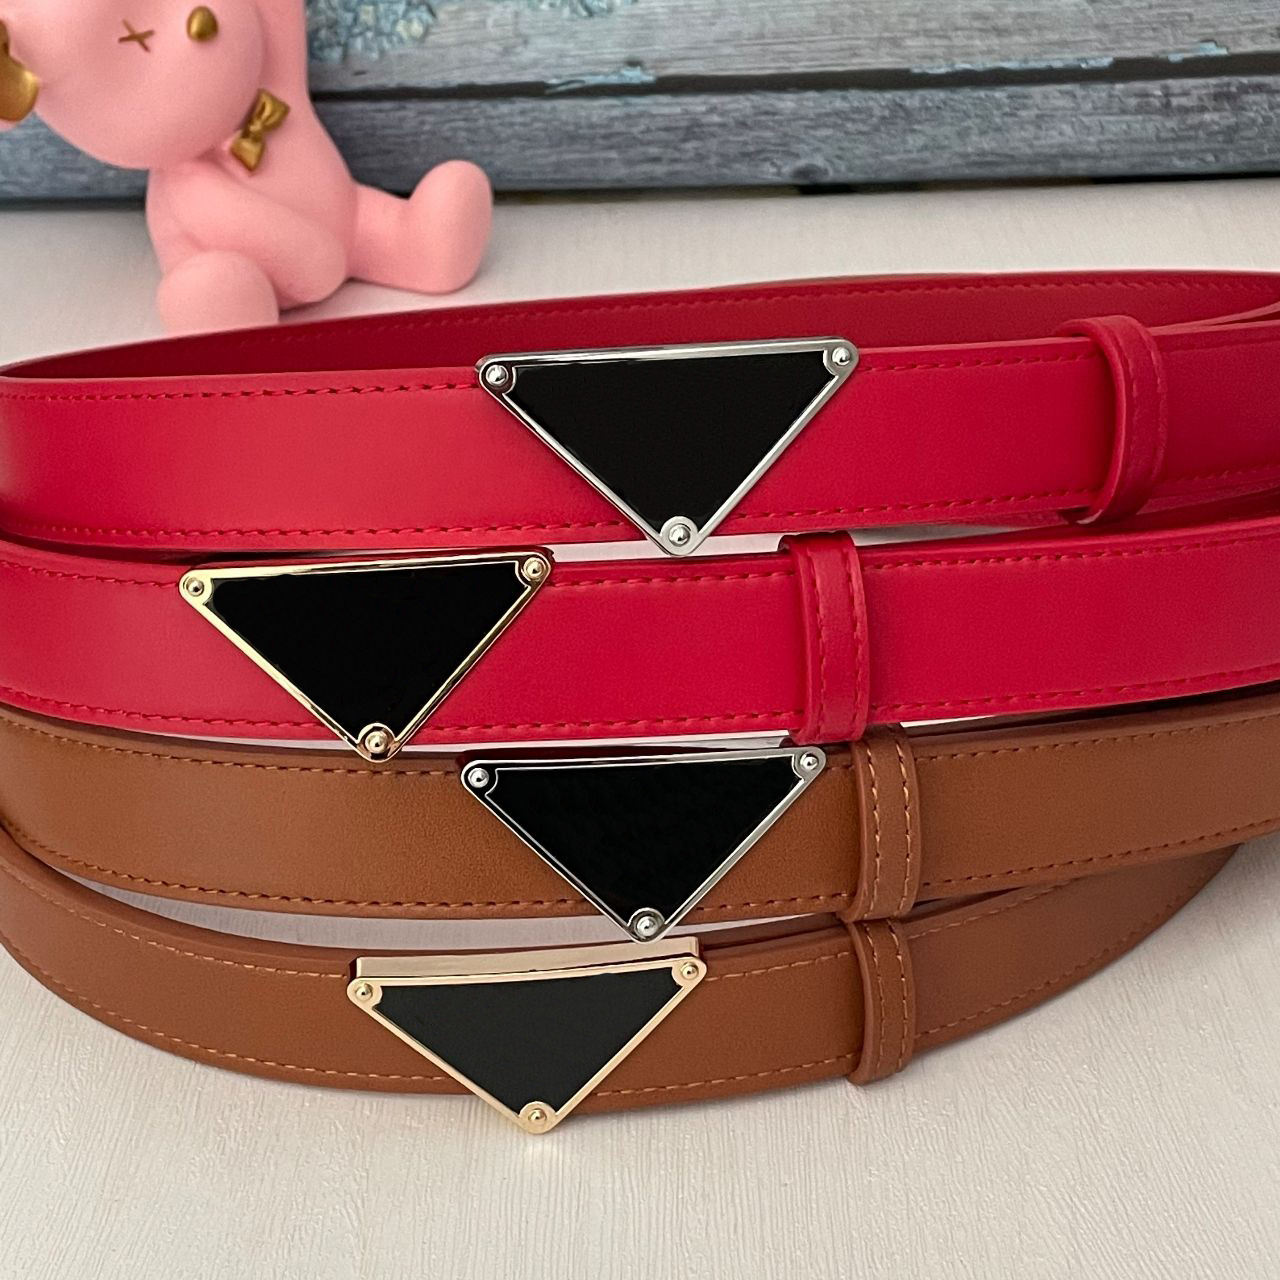 Designer Belt Luxury Women Belts Fashion Classical BiG Smooth Buckle Real Leather Strap 3 0cm Width With Box Black White Red Yello2789